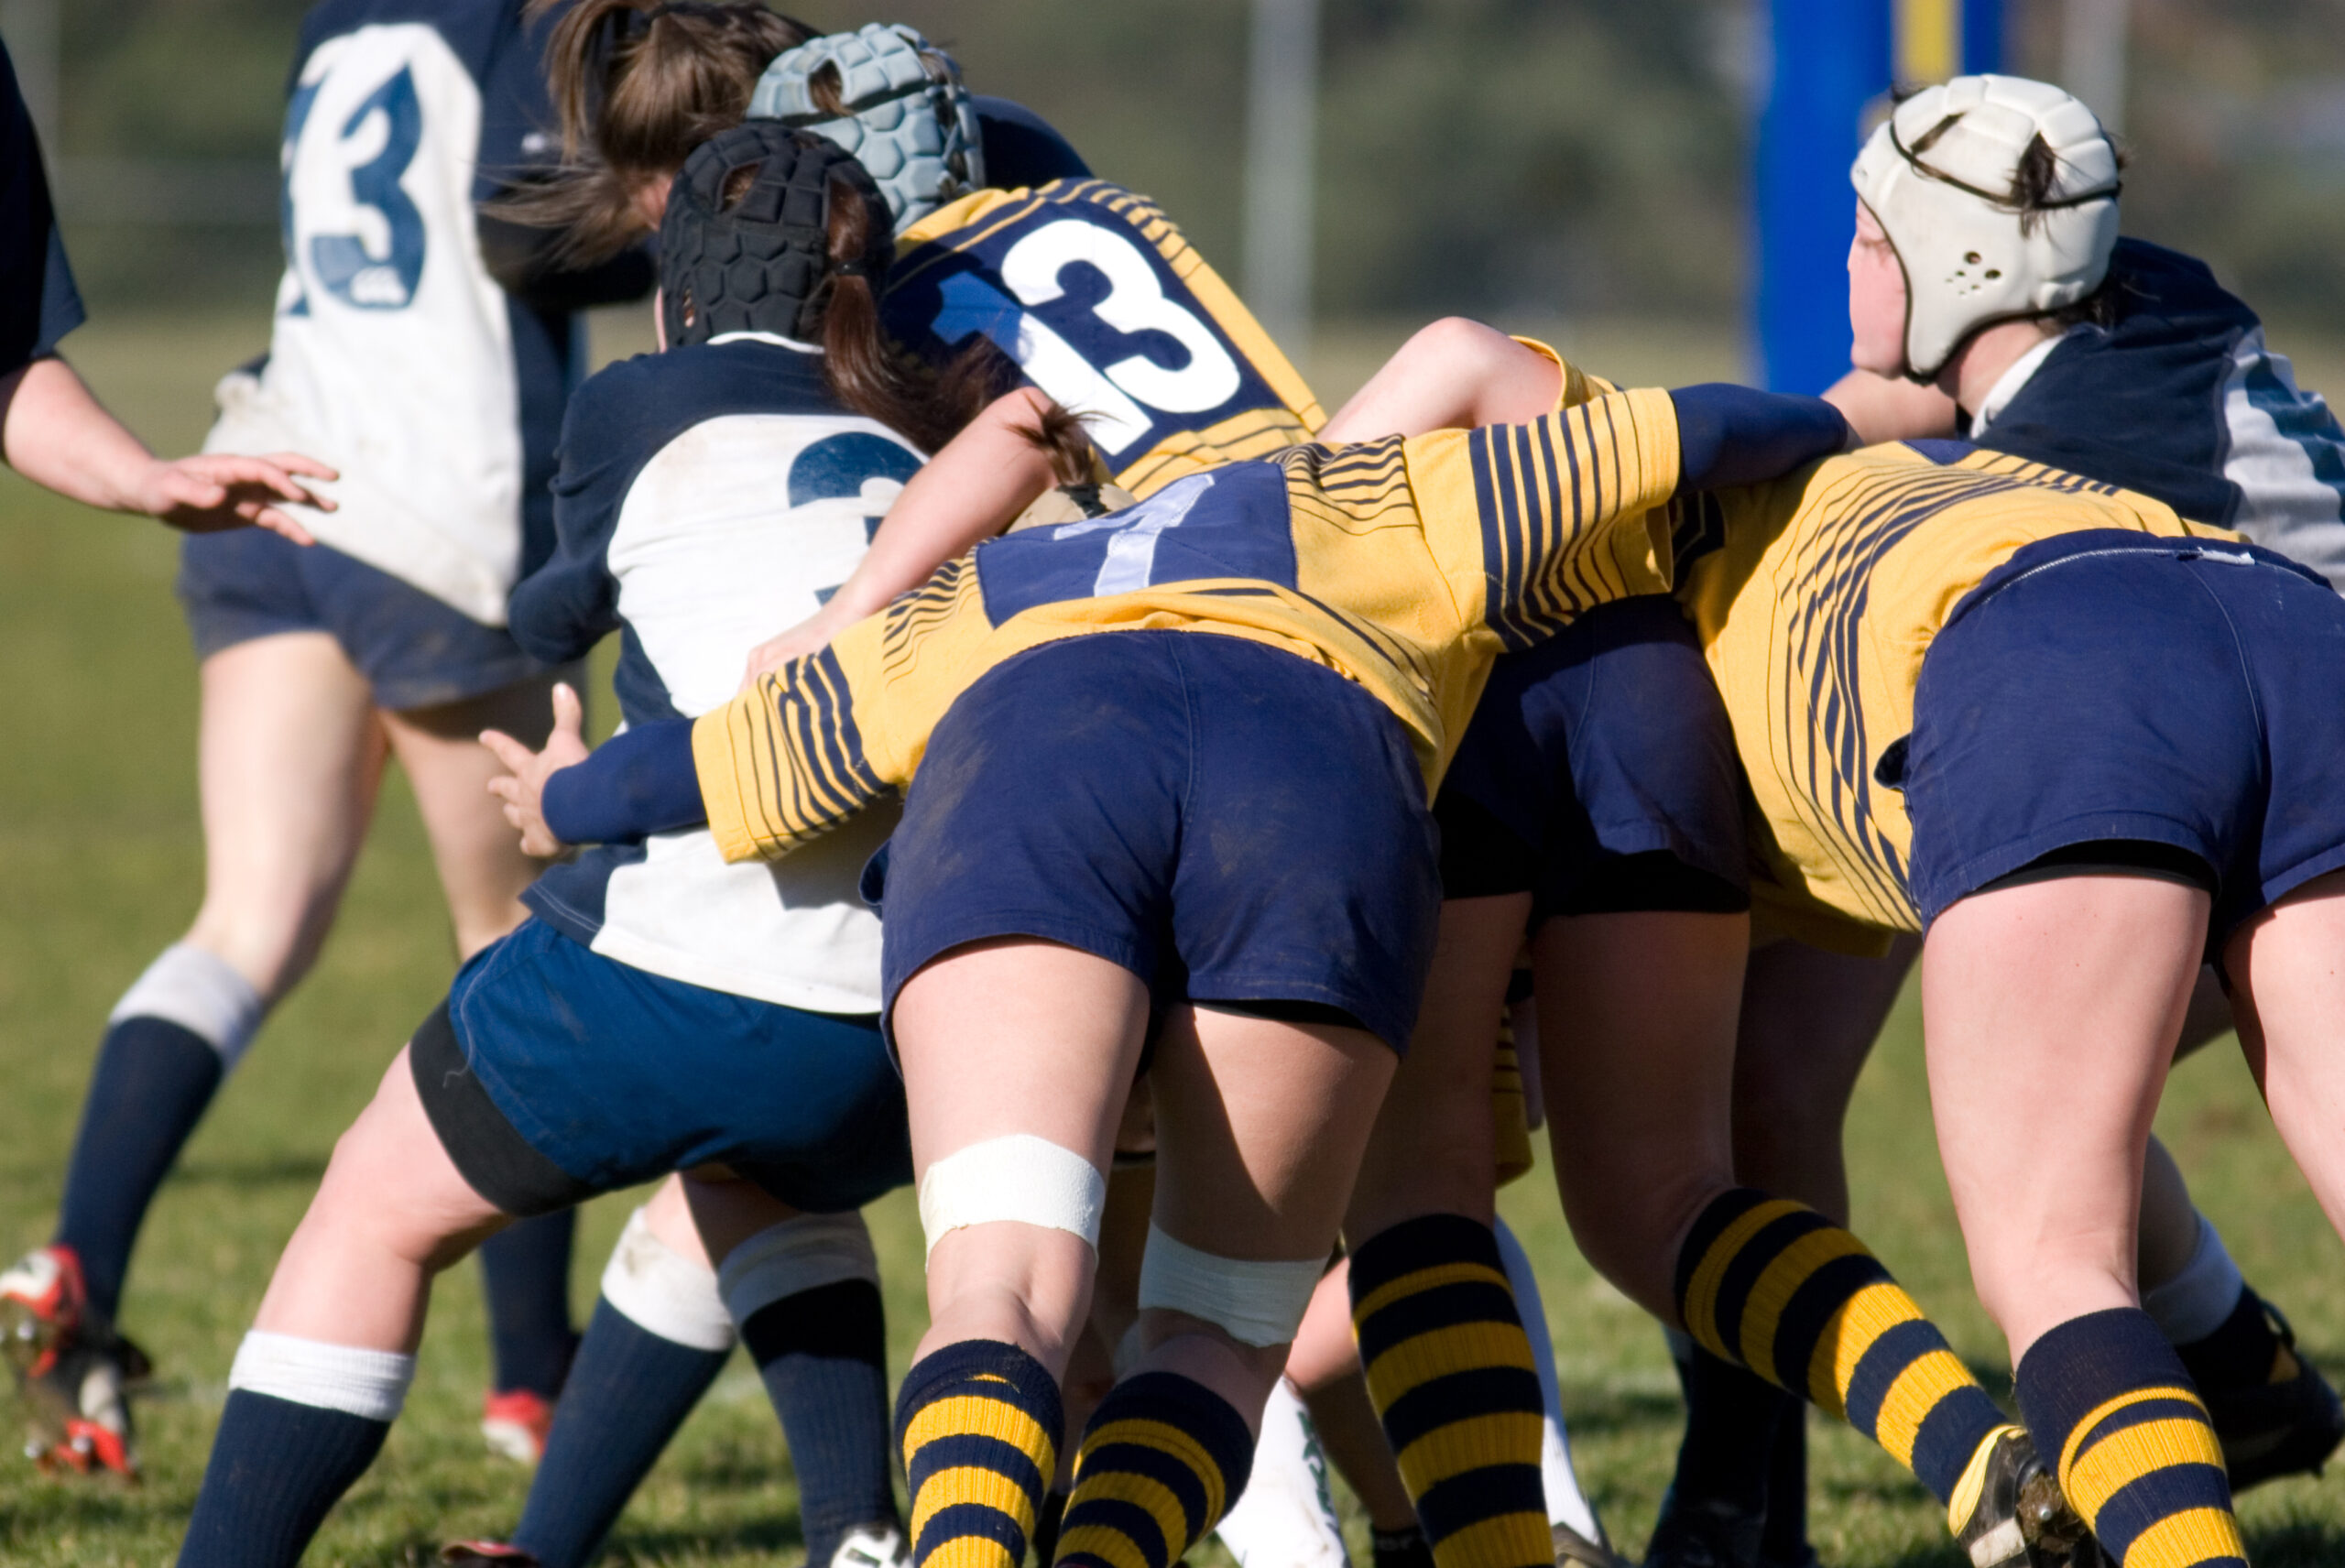 a group of girl rugby players mid-action on the field